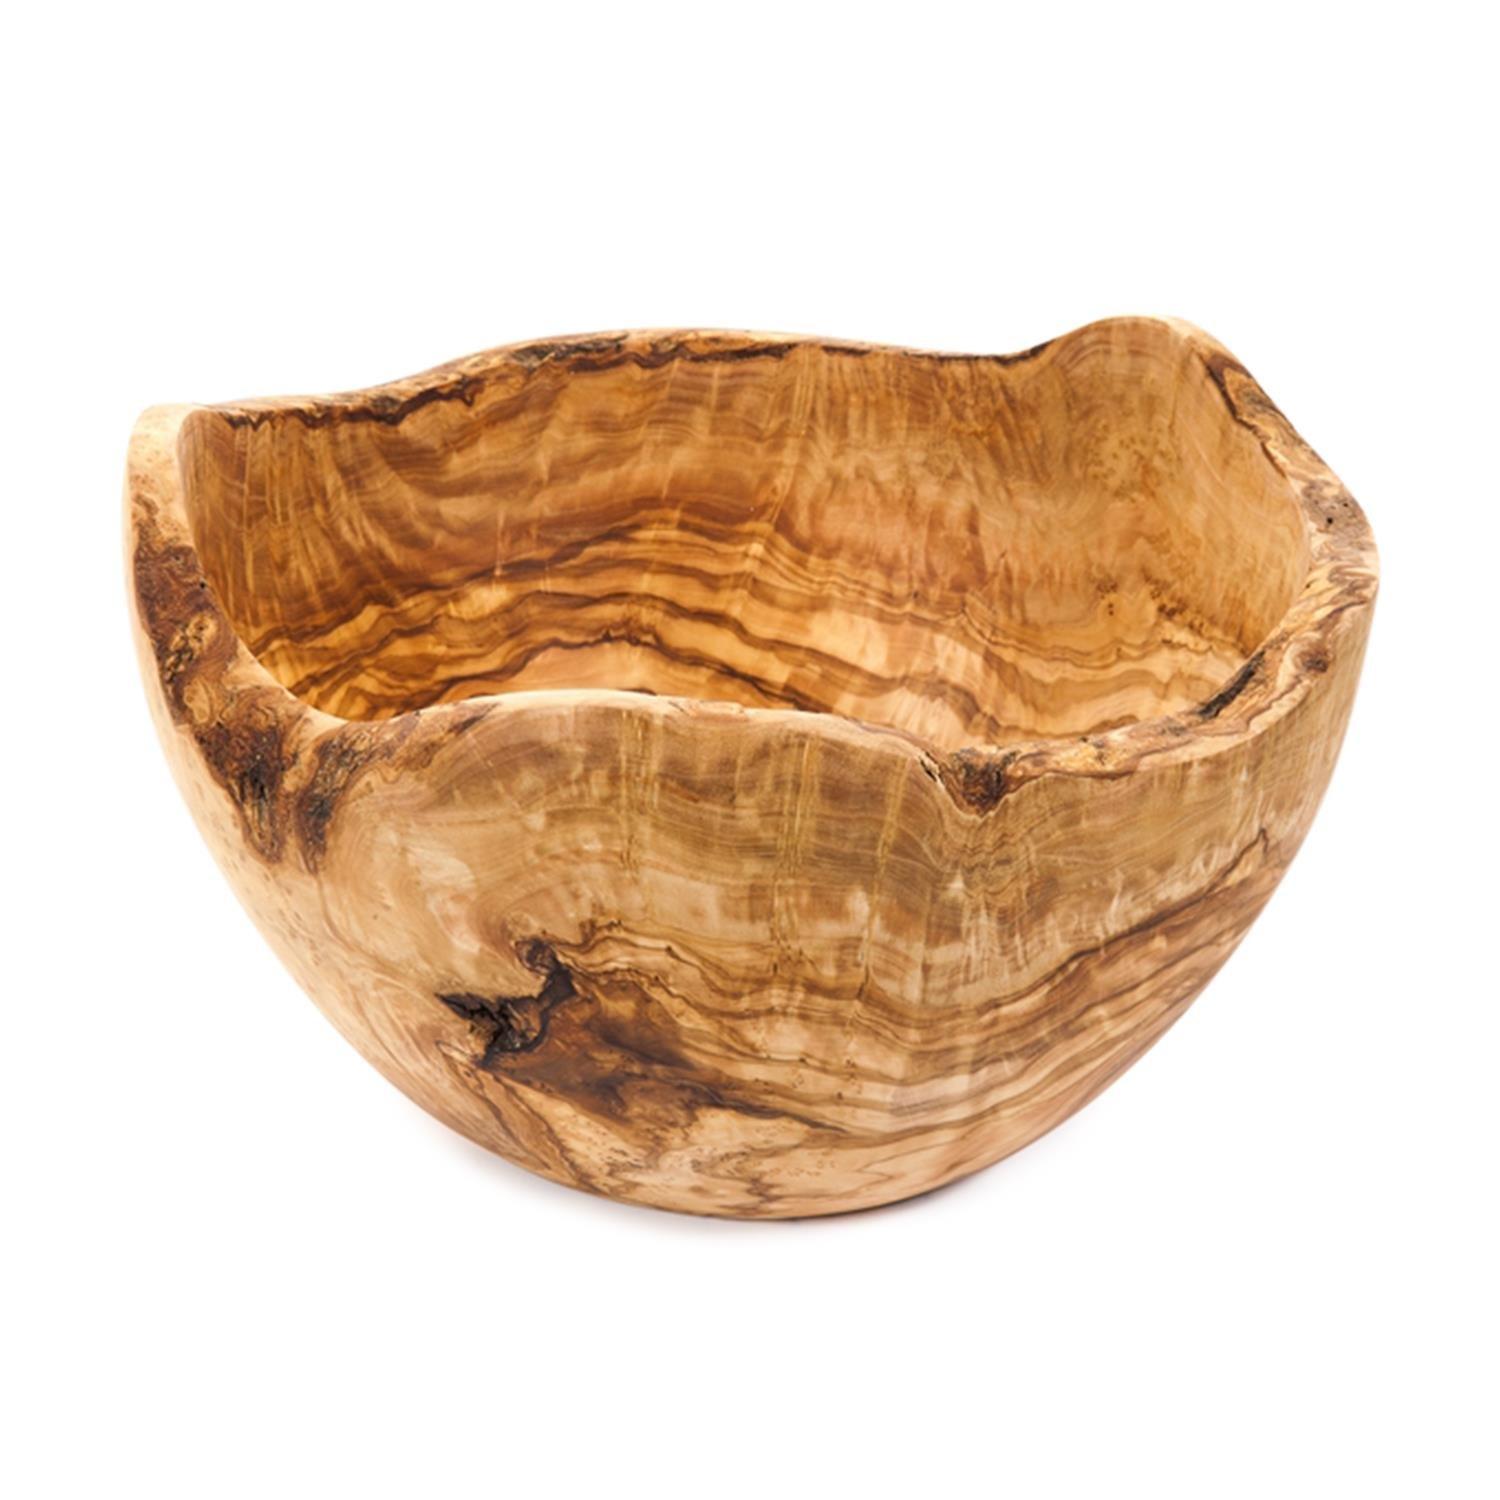 Olive Wood Natural Grained Rustic Kitchen Dining Handmade Large Luxury Bowl (Diam) 29-32cm